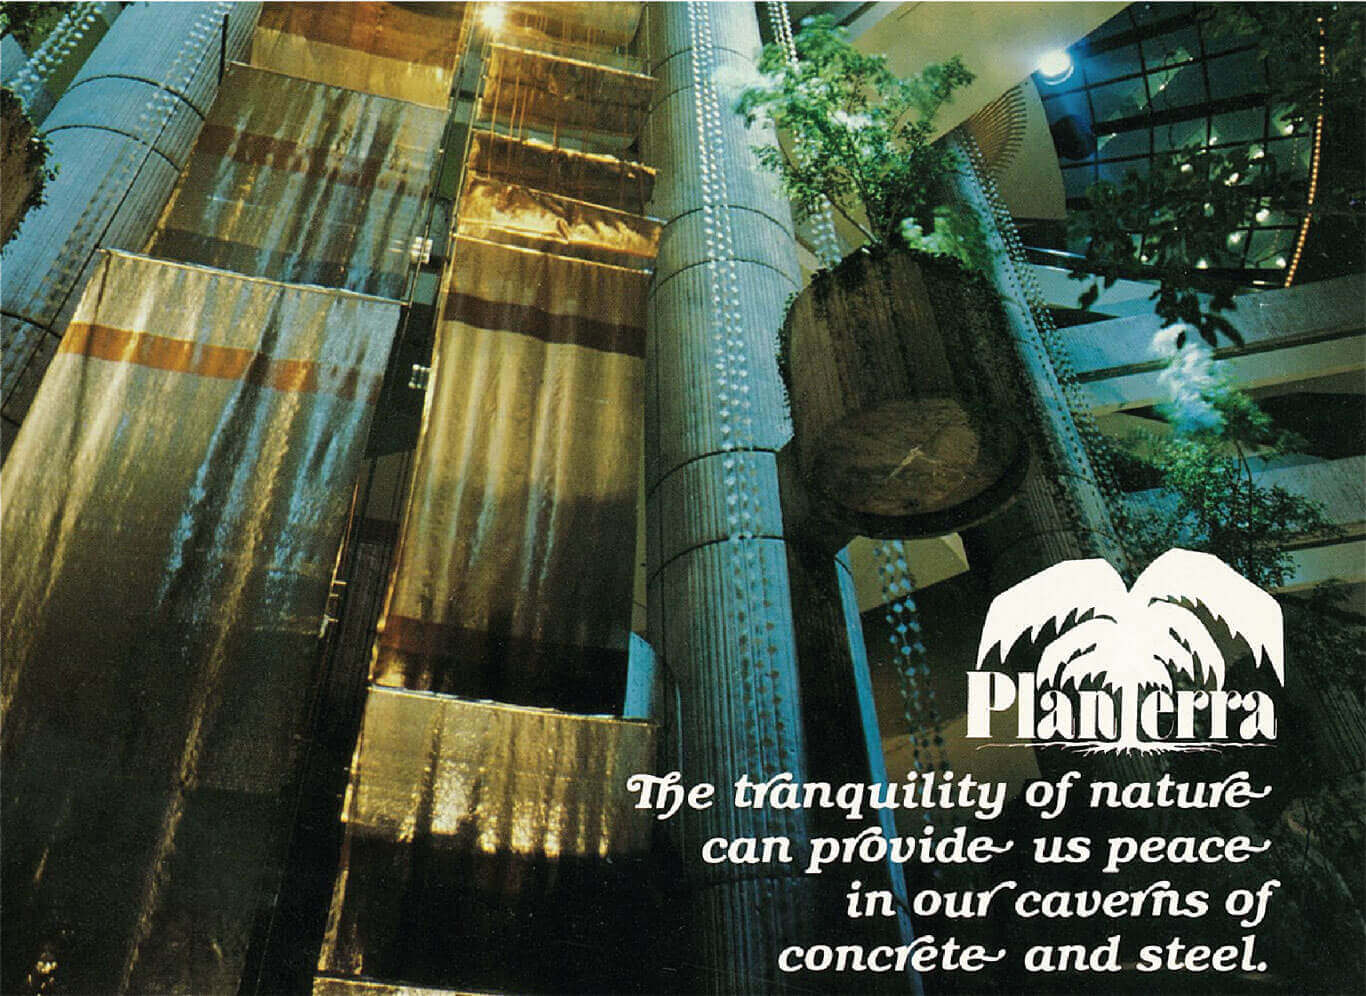 John Portman’s famous “flying Ficus trees” installed by Planterra at the Detroit Renaissance Center in 1978. This brochure contains Planterra’s original logo and philosophical slogan, “the tranquility of nature can provide us peace in our caverns of concrete and steel.”